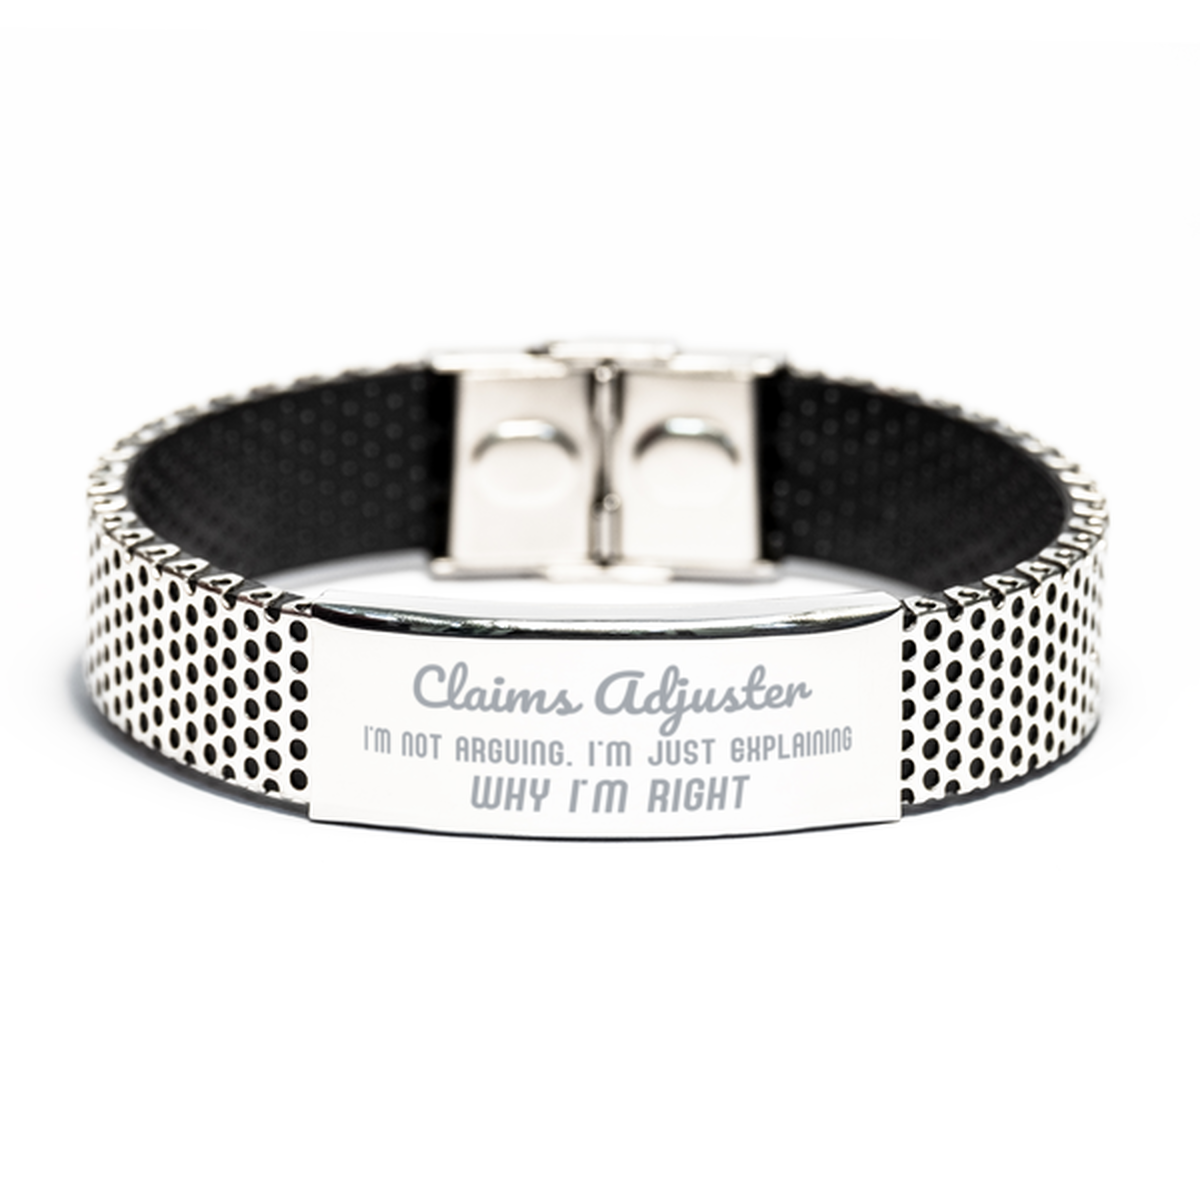 Claims Adjuster I'm not Arguing. I'm Just Explaining Why I'm RIGHT Stainless Steel Bracelet, Funny Saying Quote Claims Adjuster Gifts For Claims Adjuster Graduation Birthday Christmas Gifts for Men Women Coworker